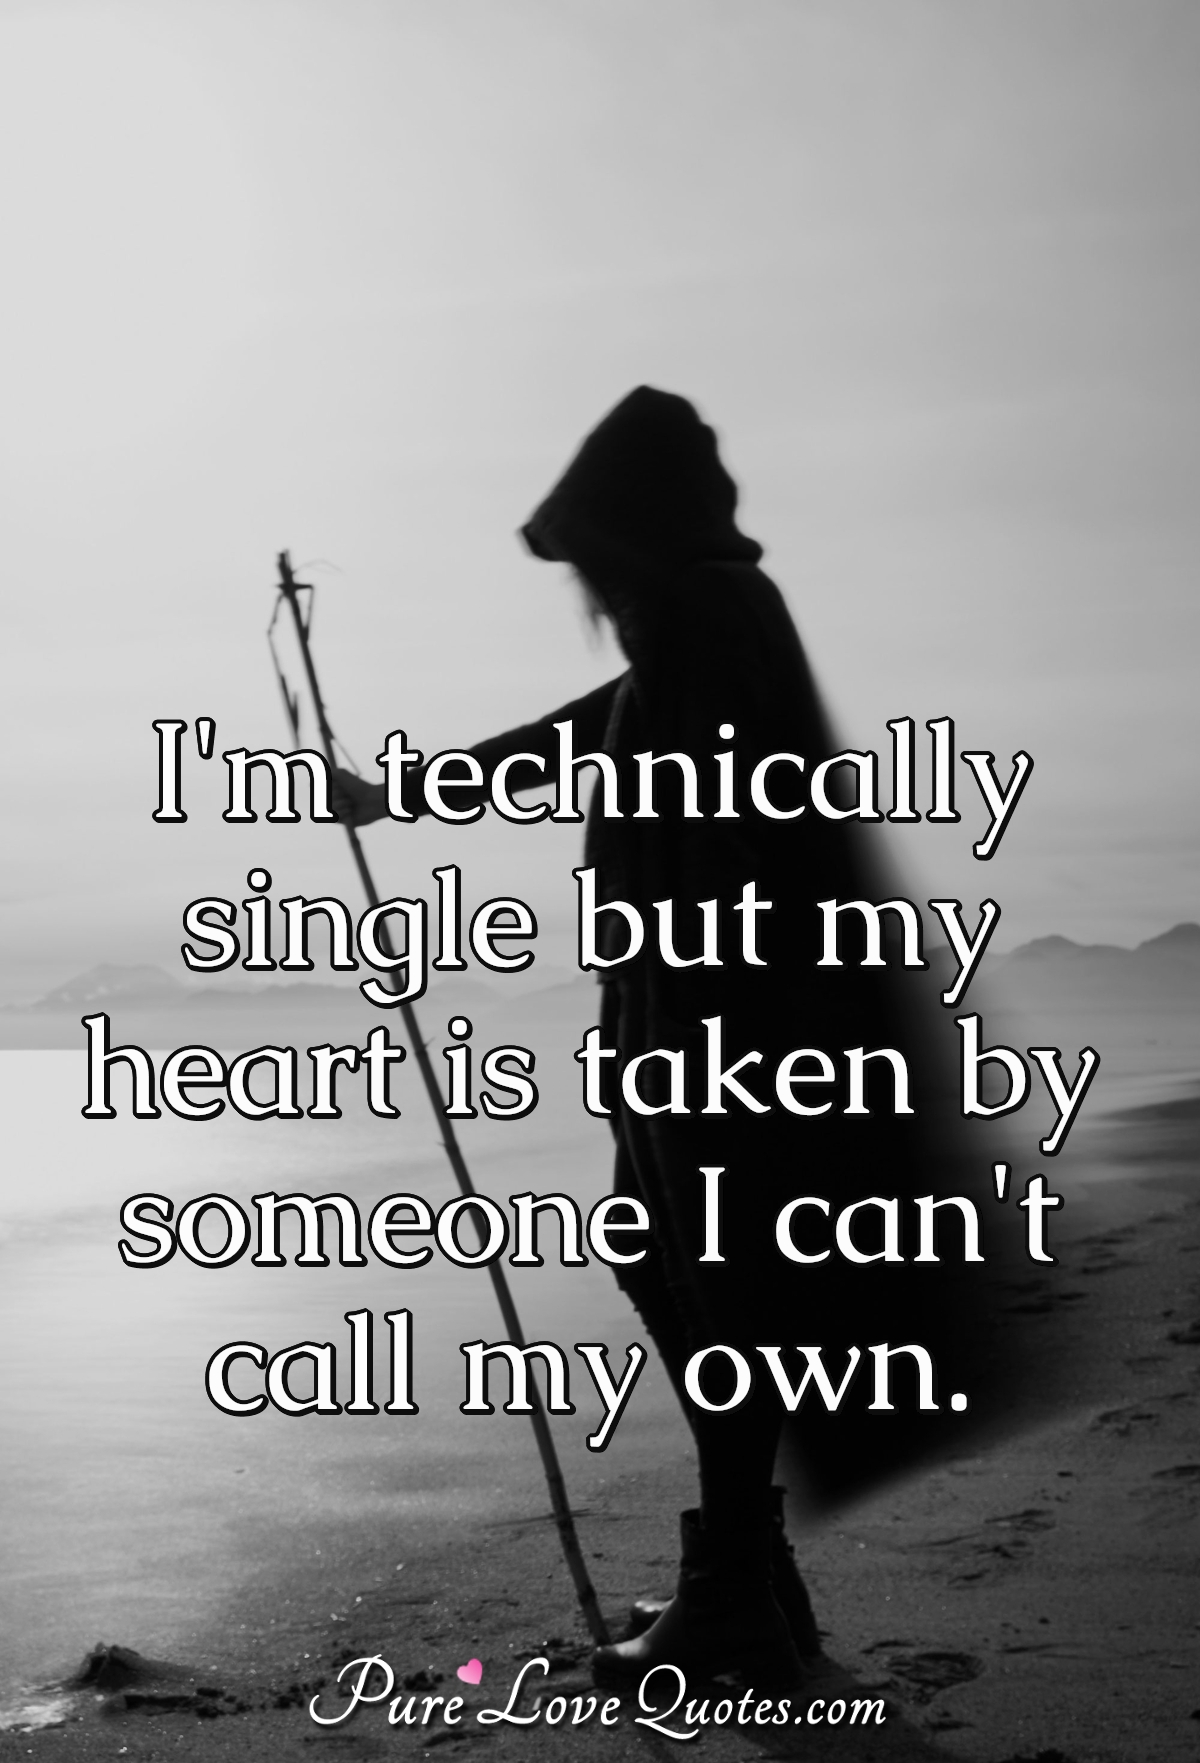 I'm single but my heart is taken quotes